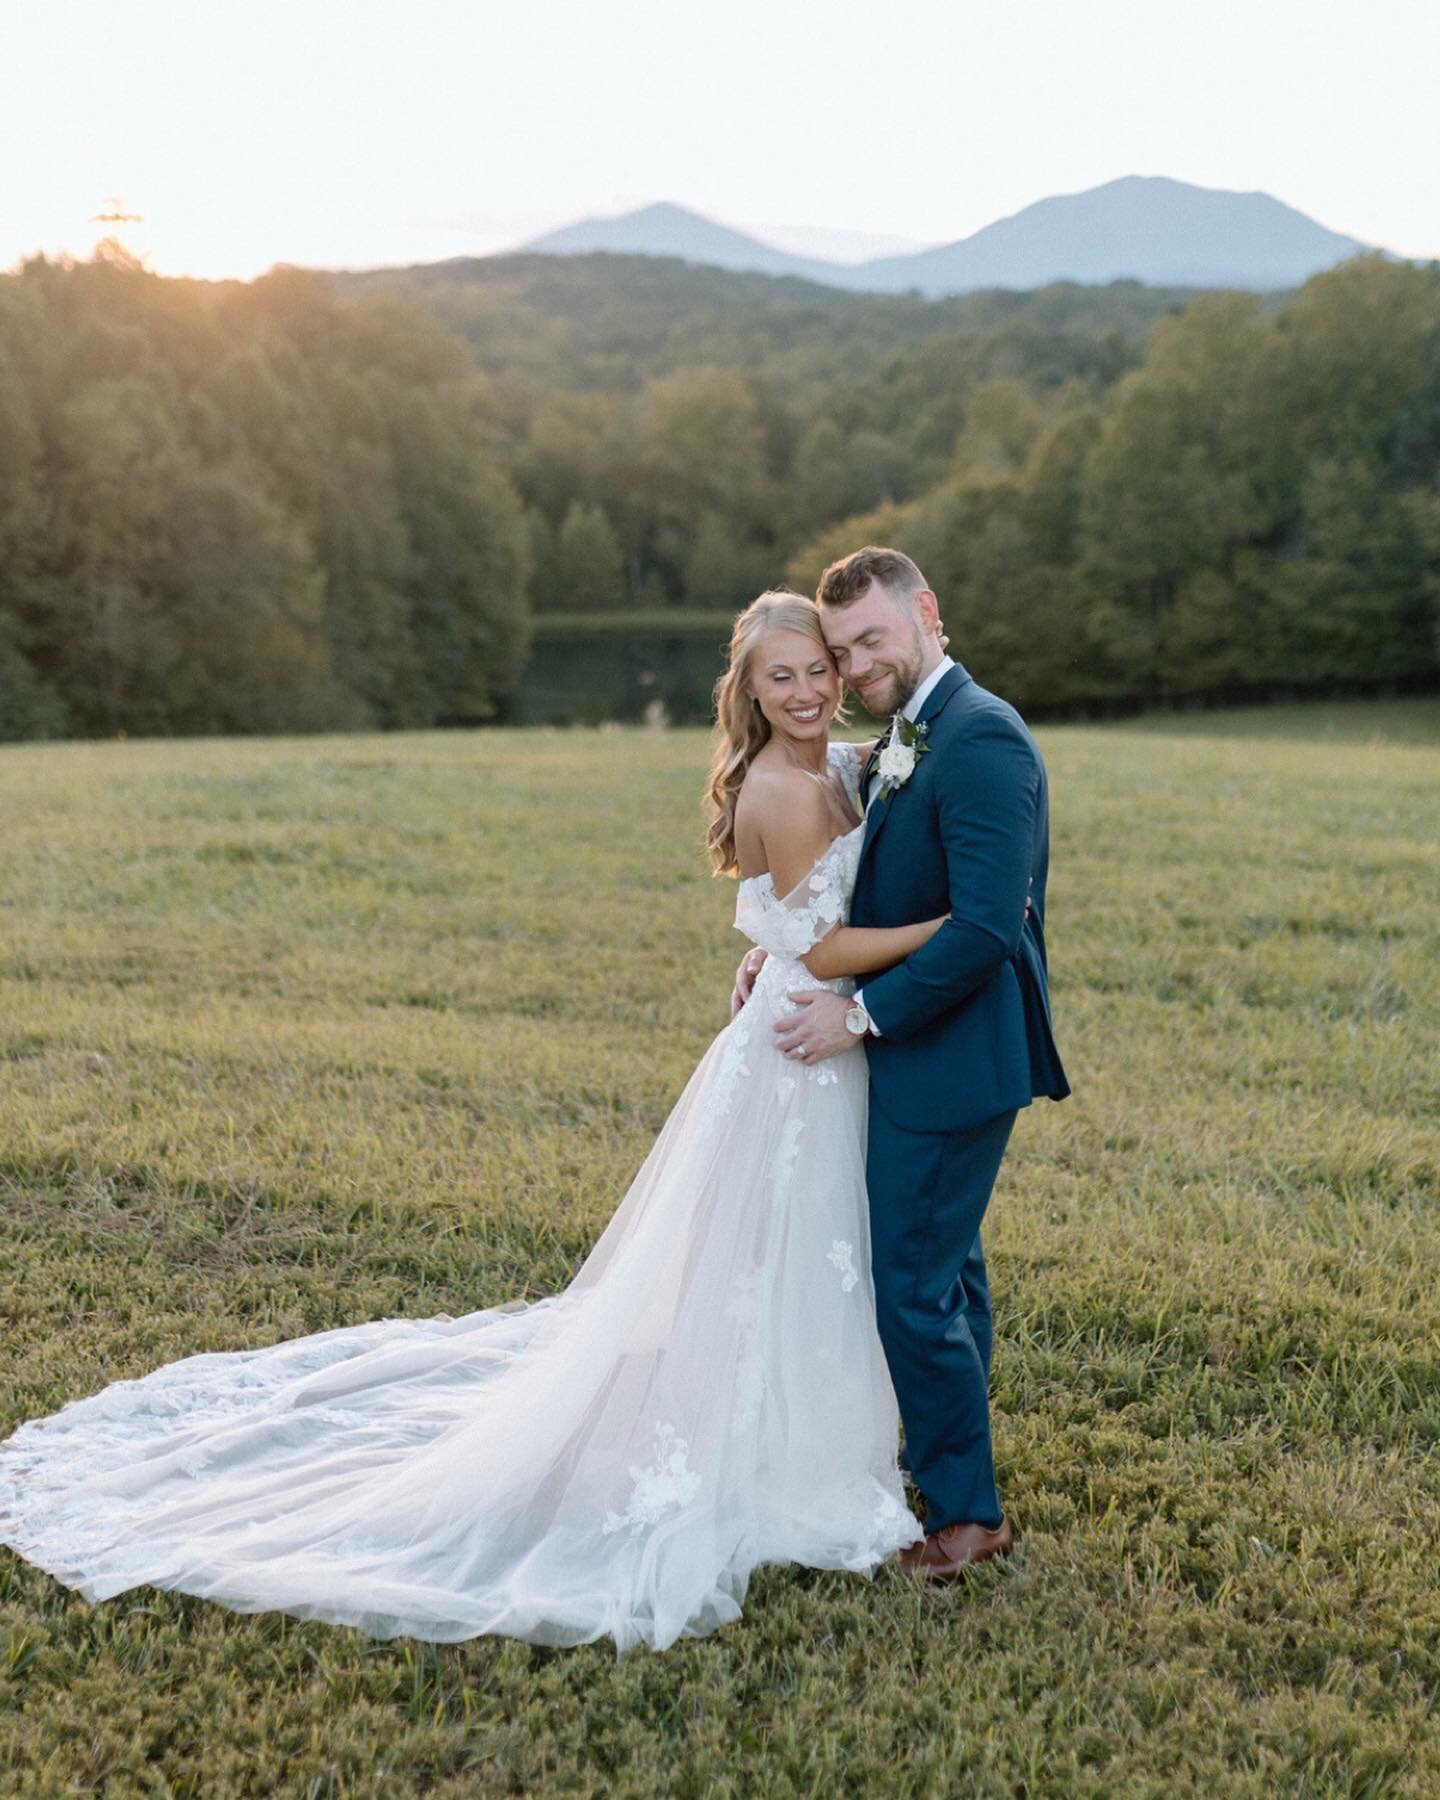 Kristen and JJ had the most beautiful wedding day last Saturday at @glasshillvenue 🤍 Here are some of our favs from their previews